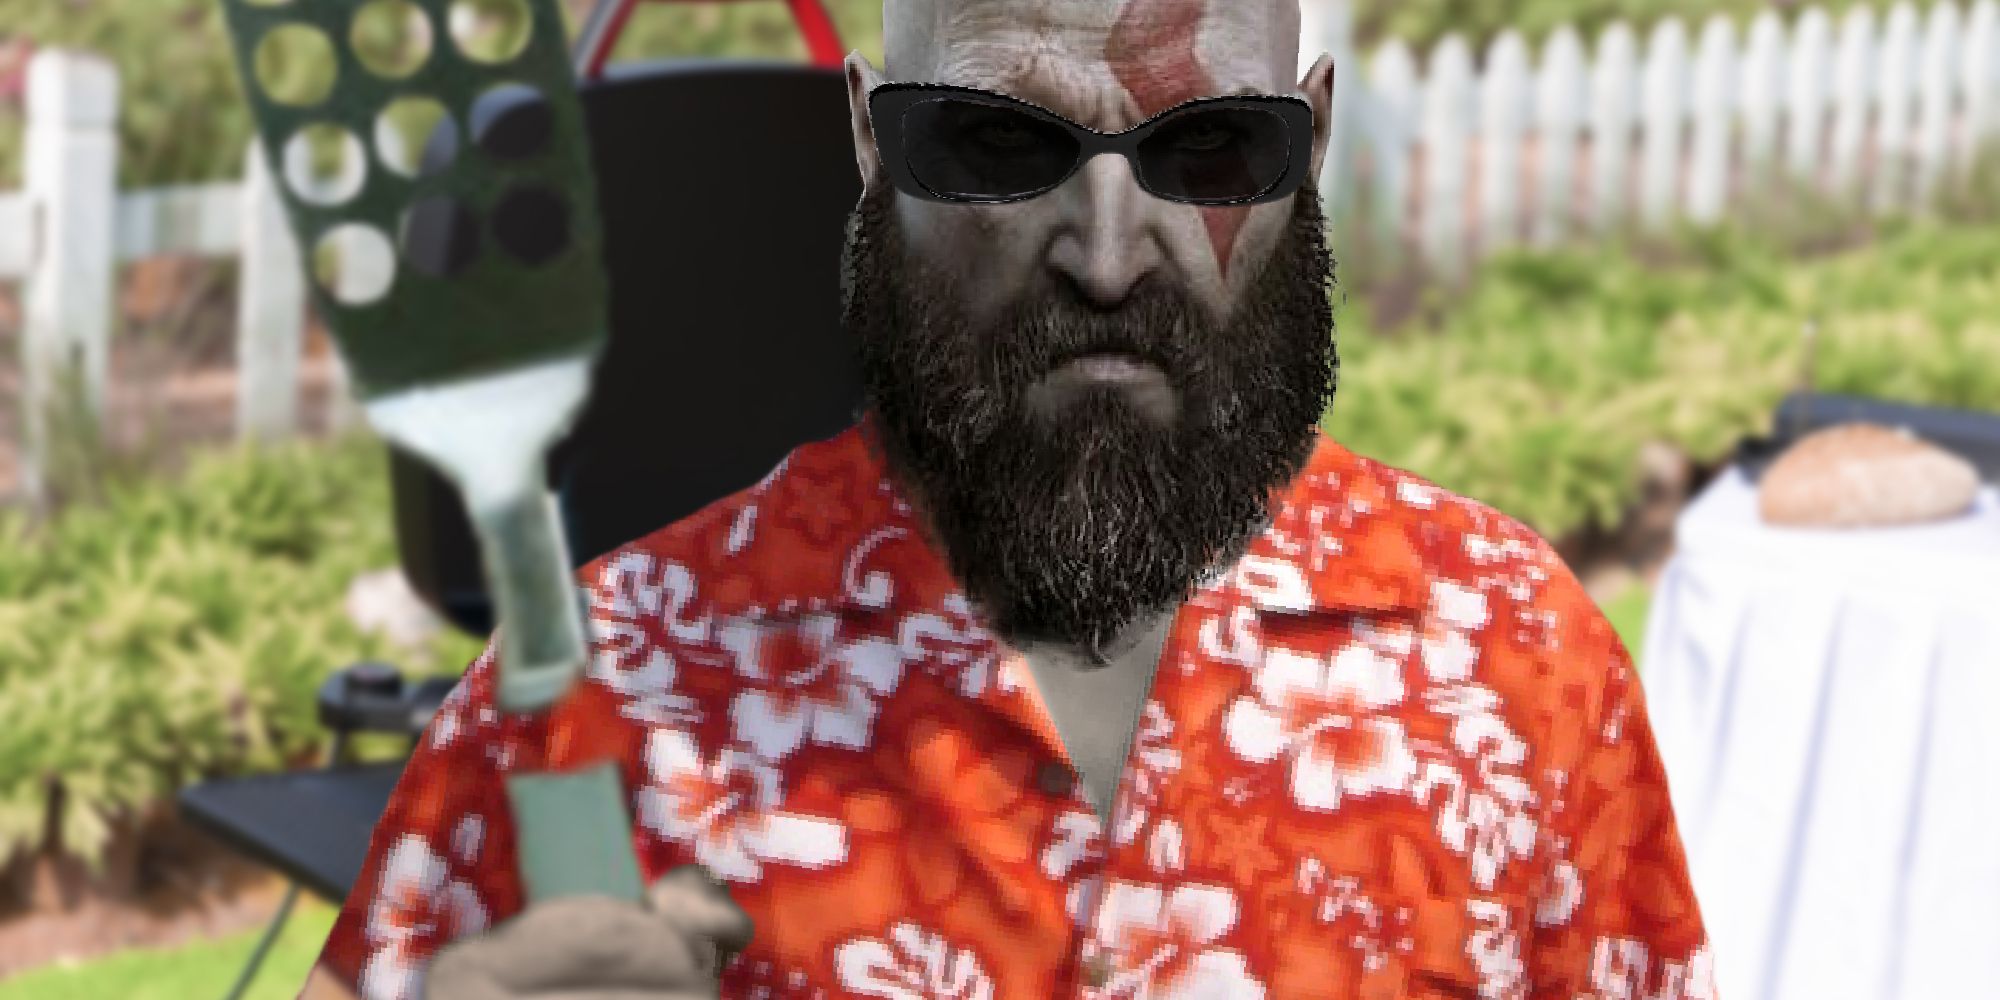 John Kratos in a nice hawaiin shirt in front of a bbq with sunglasses on